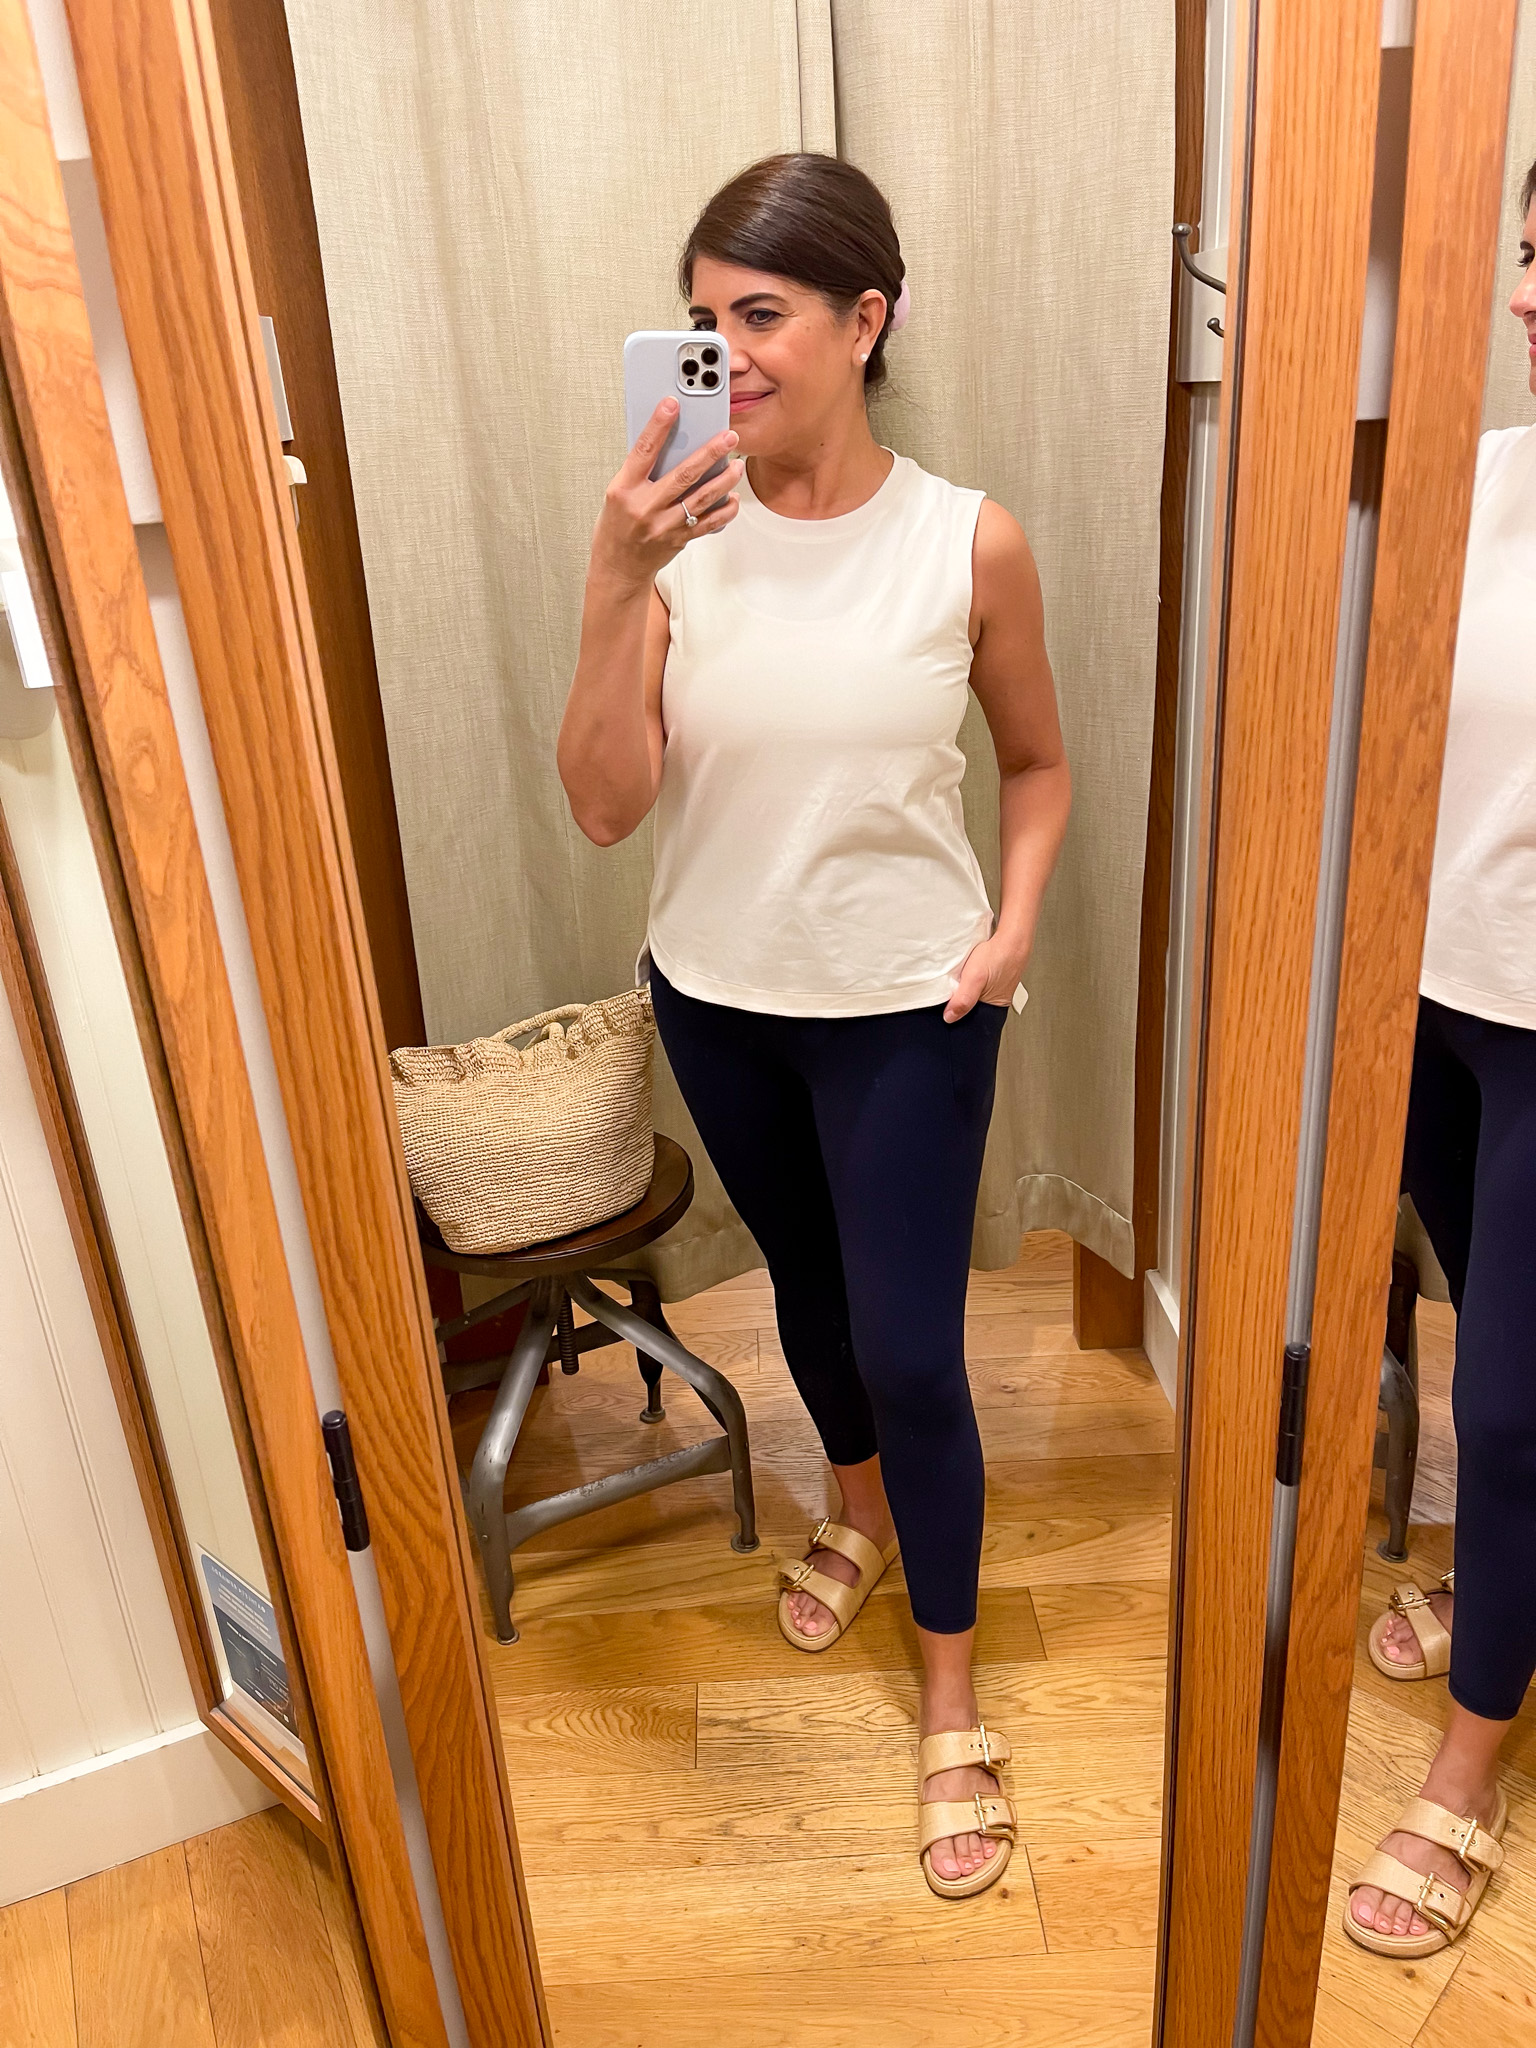 I found the perfect workout bra that's supportive and provides mobility by Desiree Leone of Beautifully Seaside.